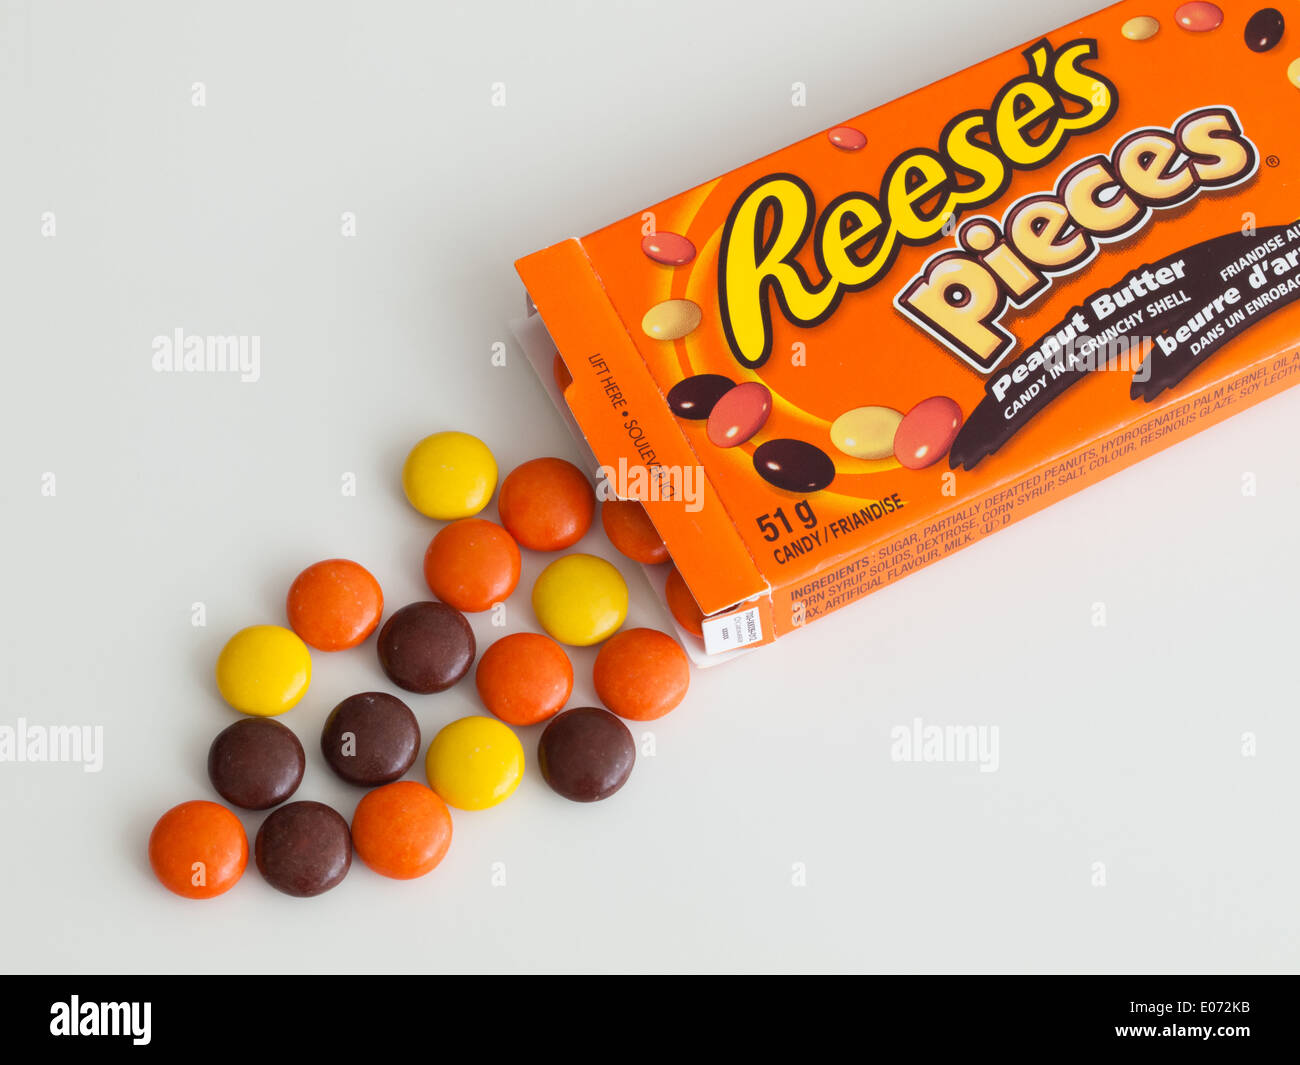 Ramos reese pieces Reese's Pieces